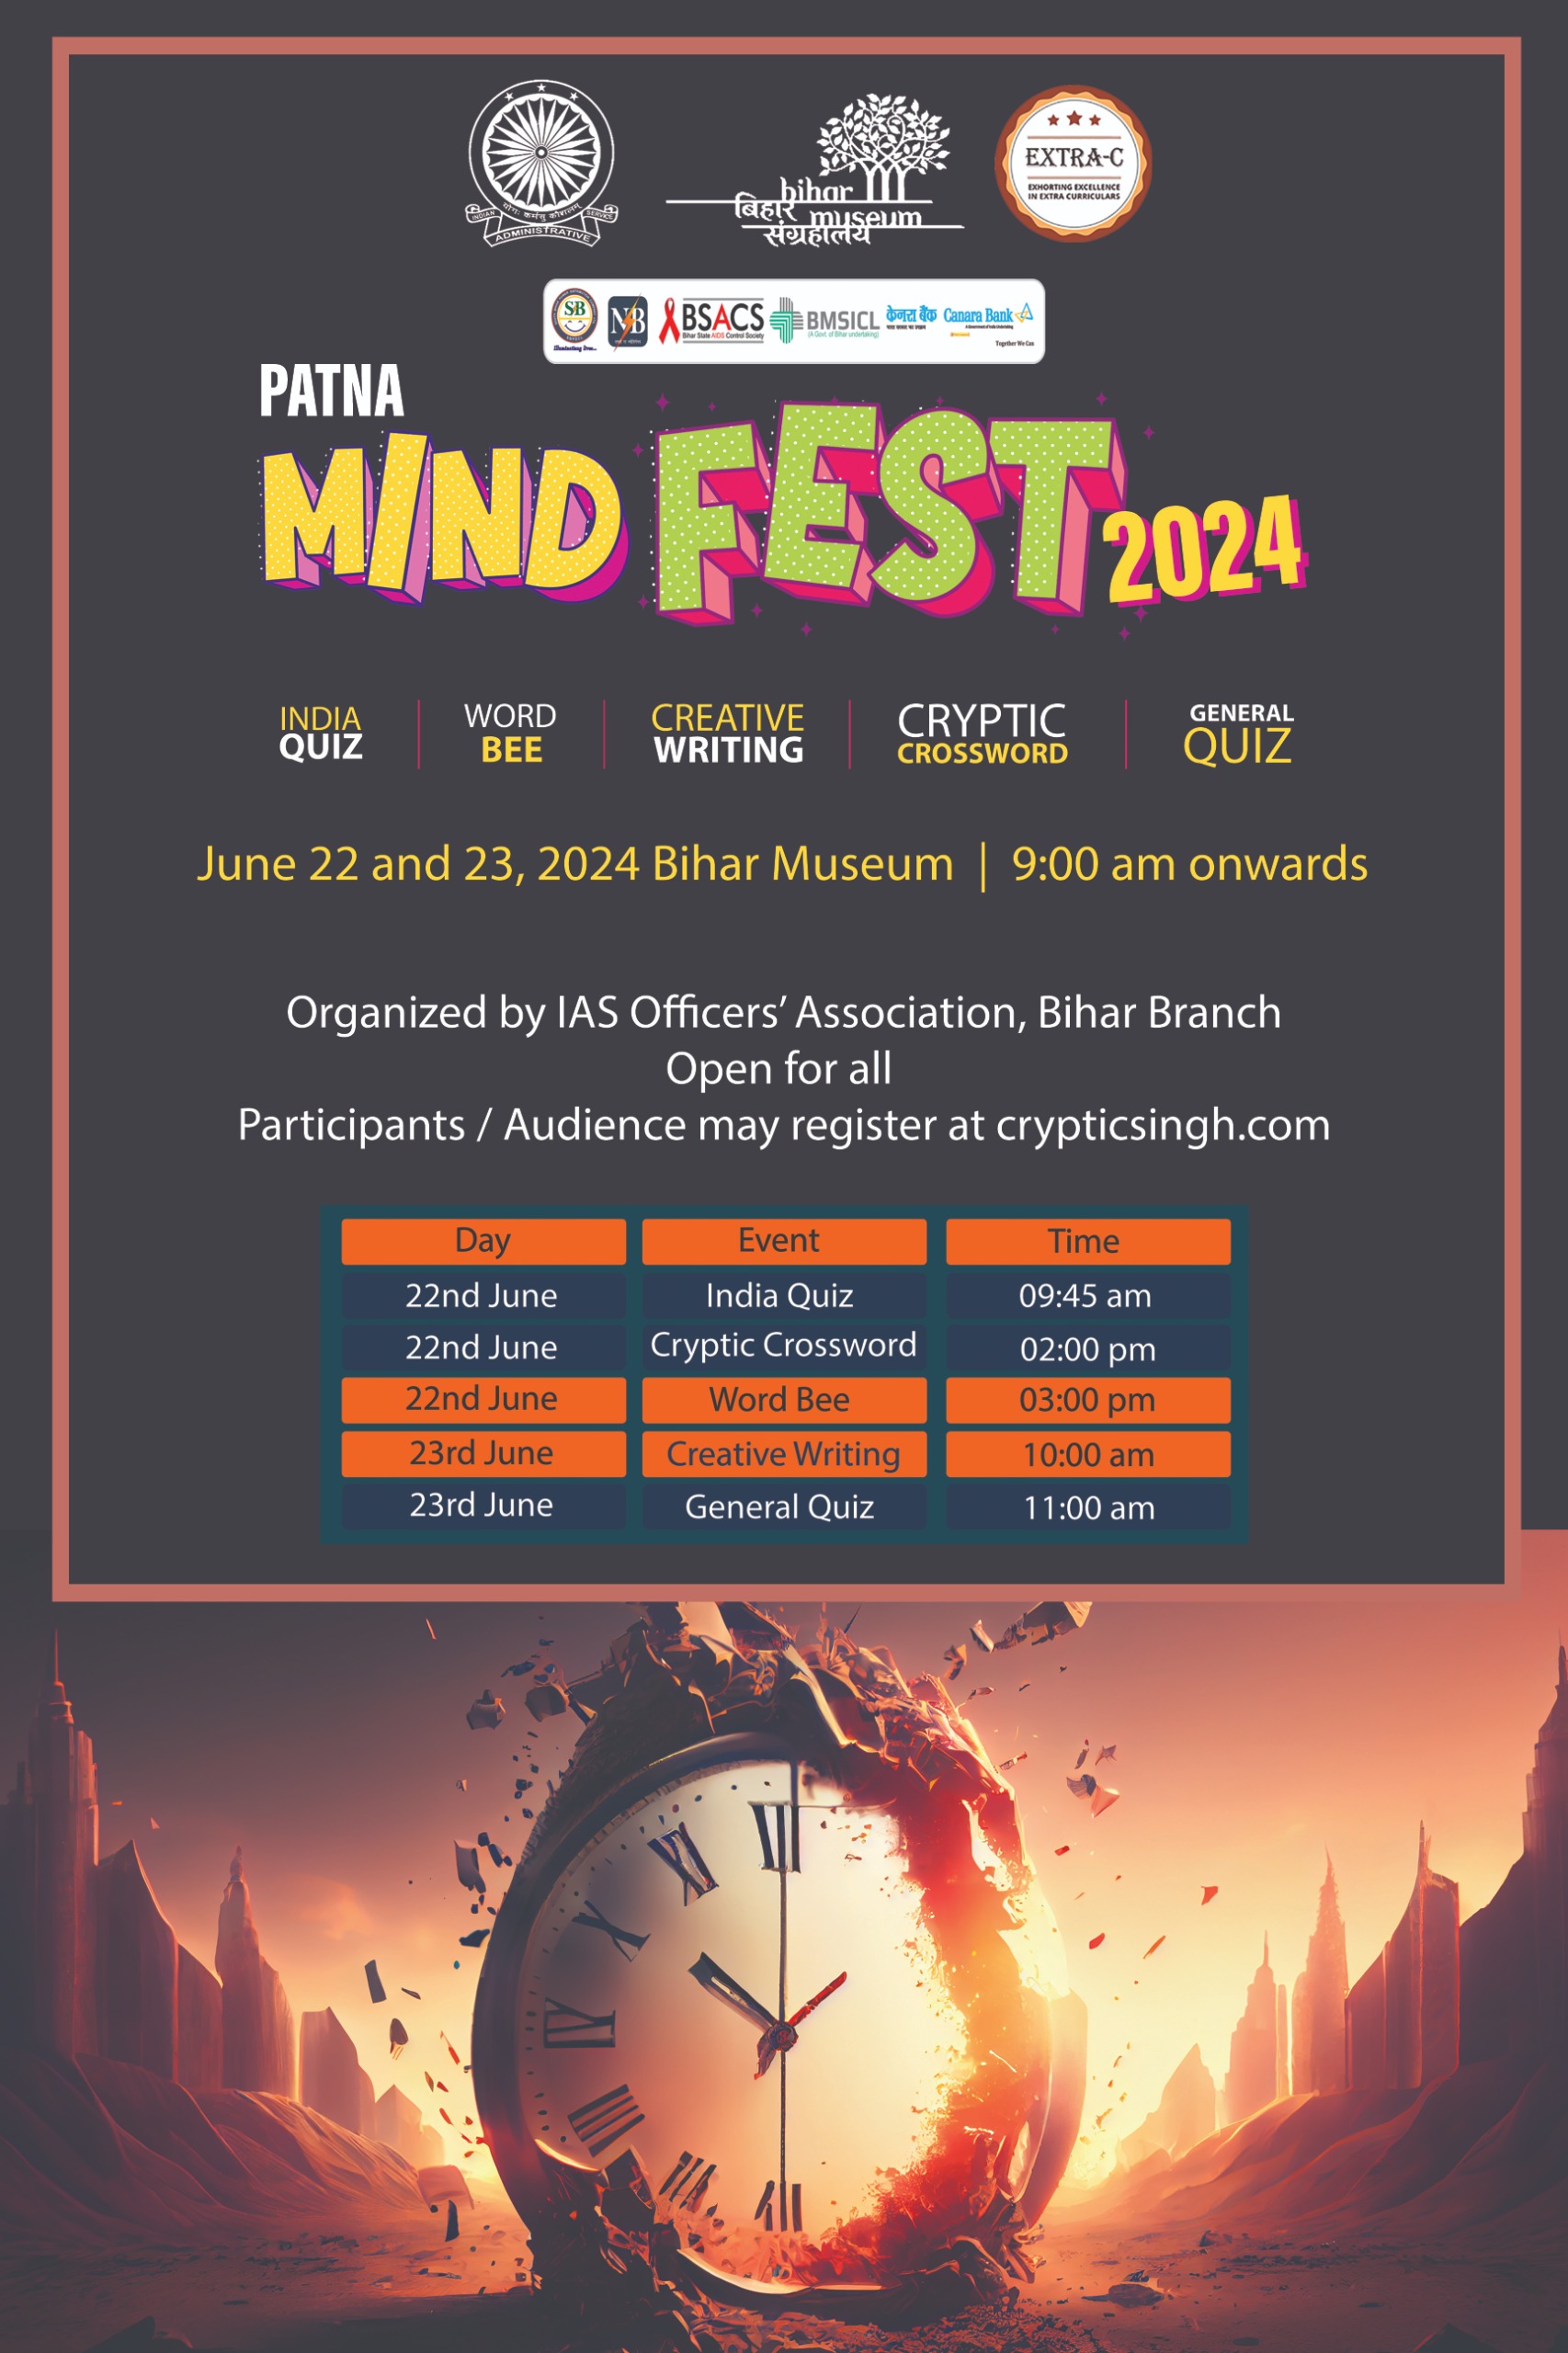 Patna Mindfest 2024: A Two-Day Celebration of Creativity and Knowledge at Patna Museum